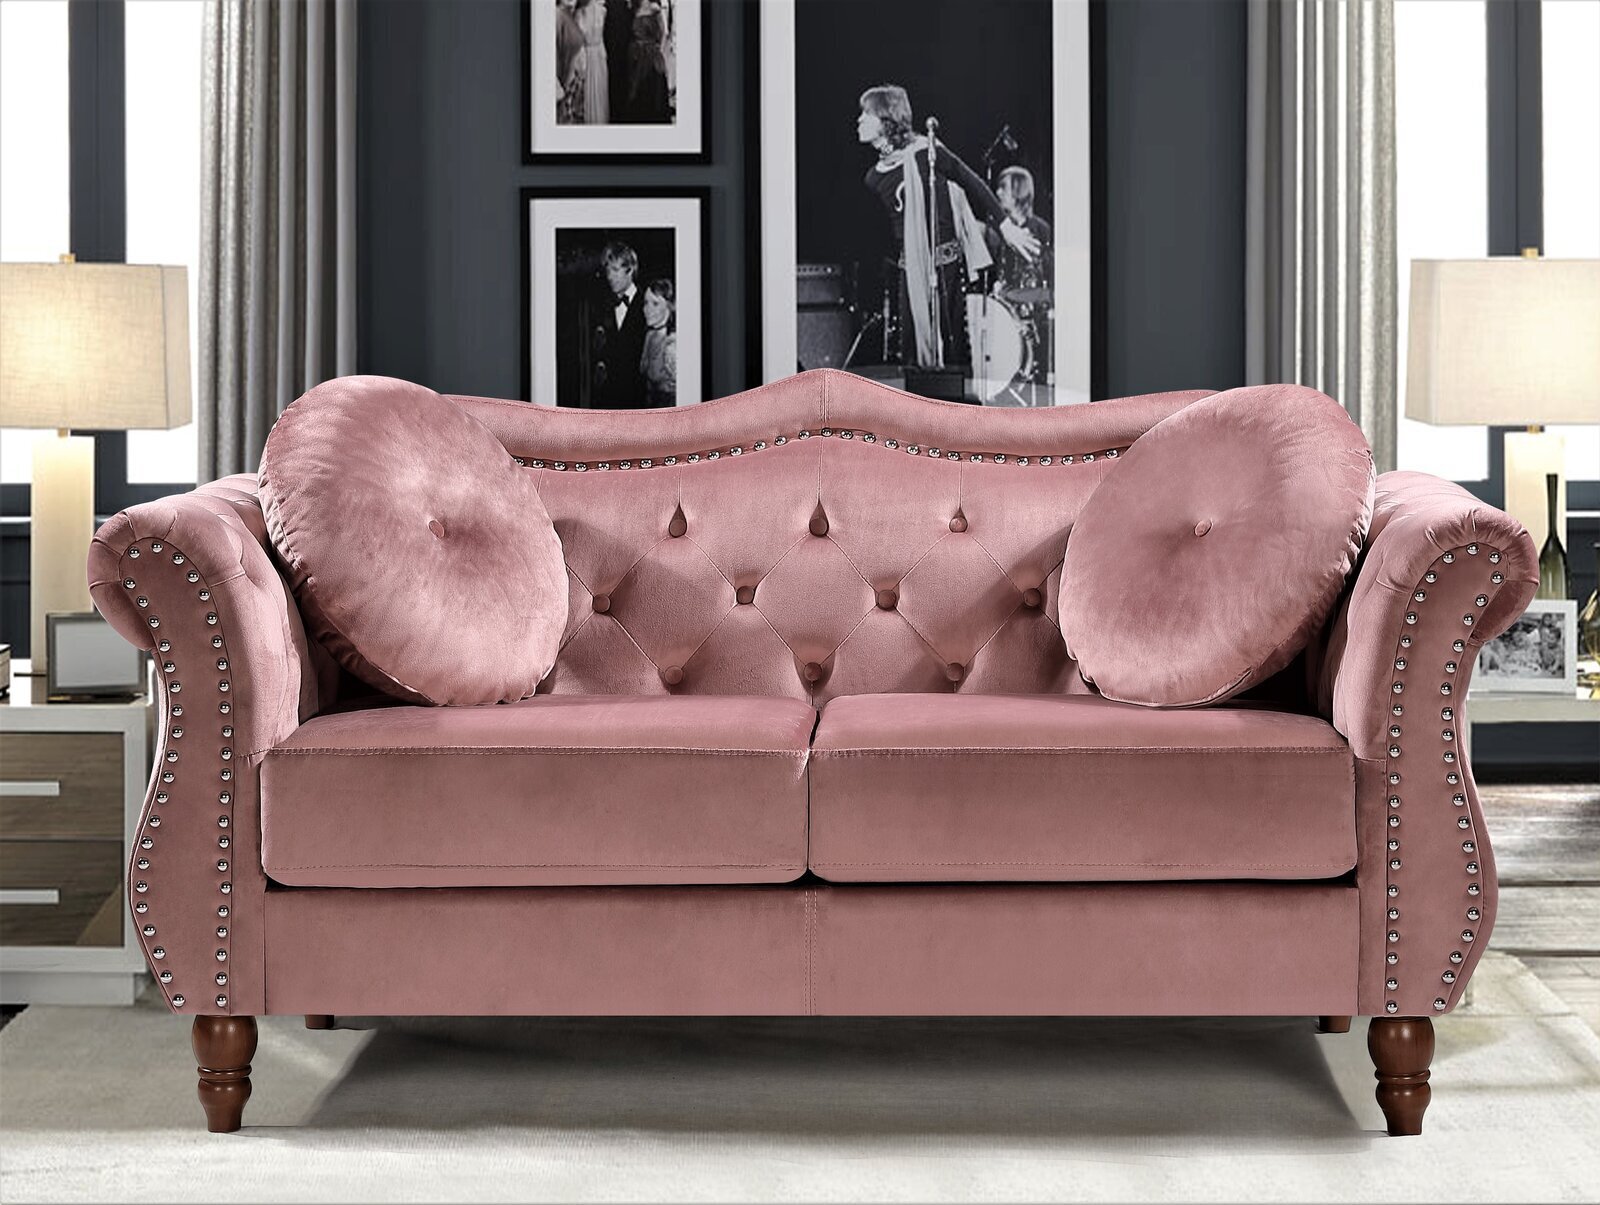 Regal, Dusky Pink Sofa With Studs And Cushions 